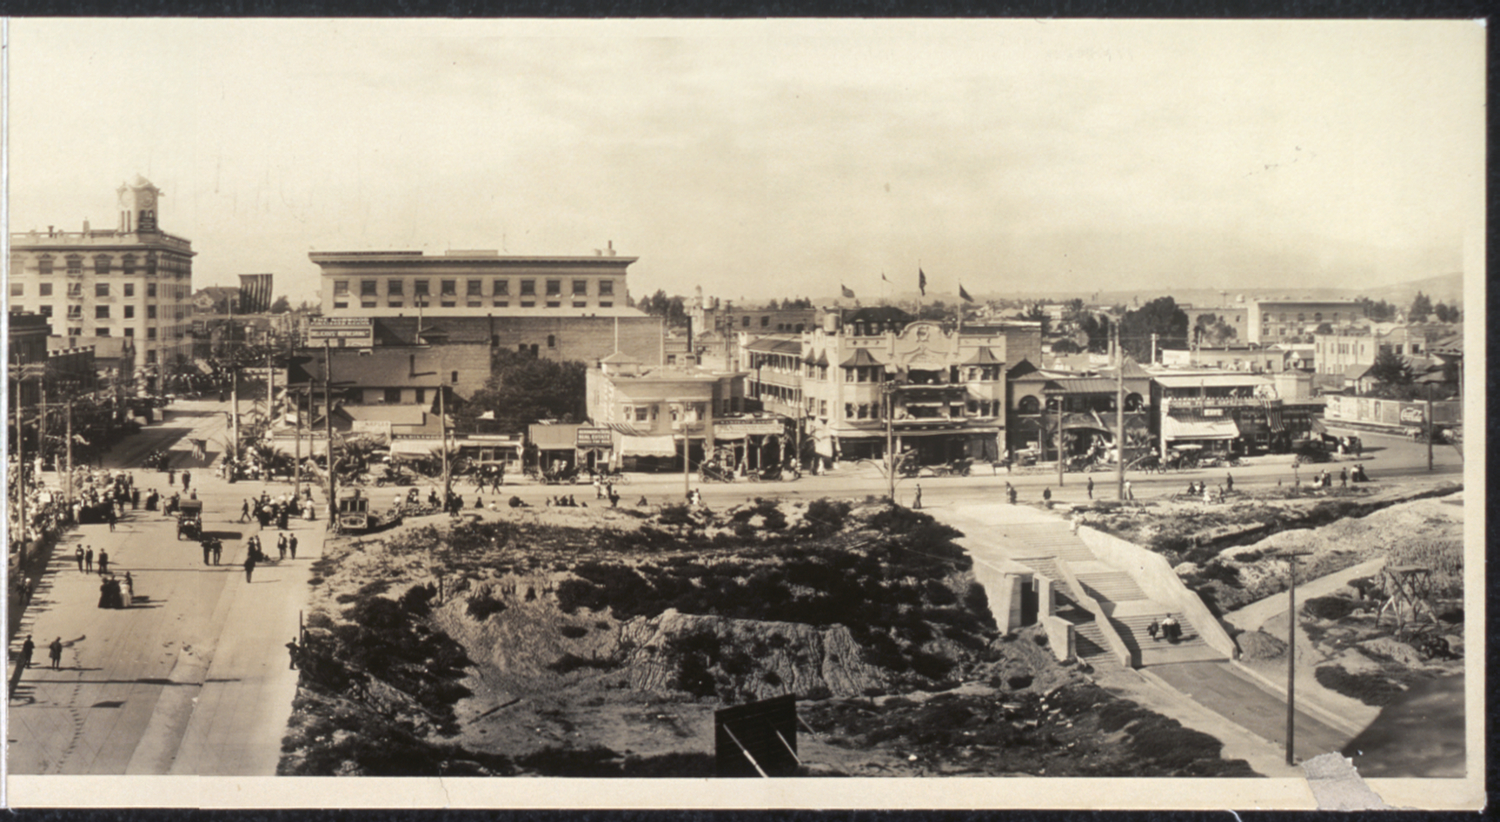 Panel 3 of 3 - A panoramic shot of Long Beach looking north up Pine Avenue and west along the shore, 1908. Before any Port development had begun, beach is all that could be seen. The First National Bank of Long Beach at First Street and Pine Avenue, built in 1906 (at left with clock tower), is still a familiar landmark today and houses Italian restaurant L'Opera.